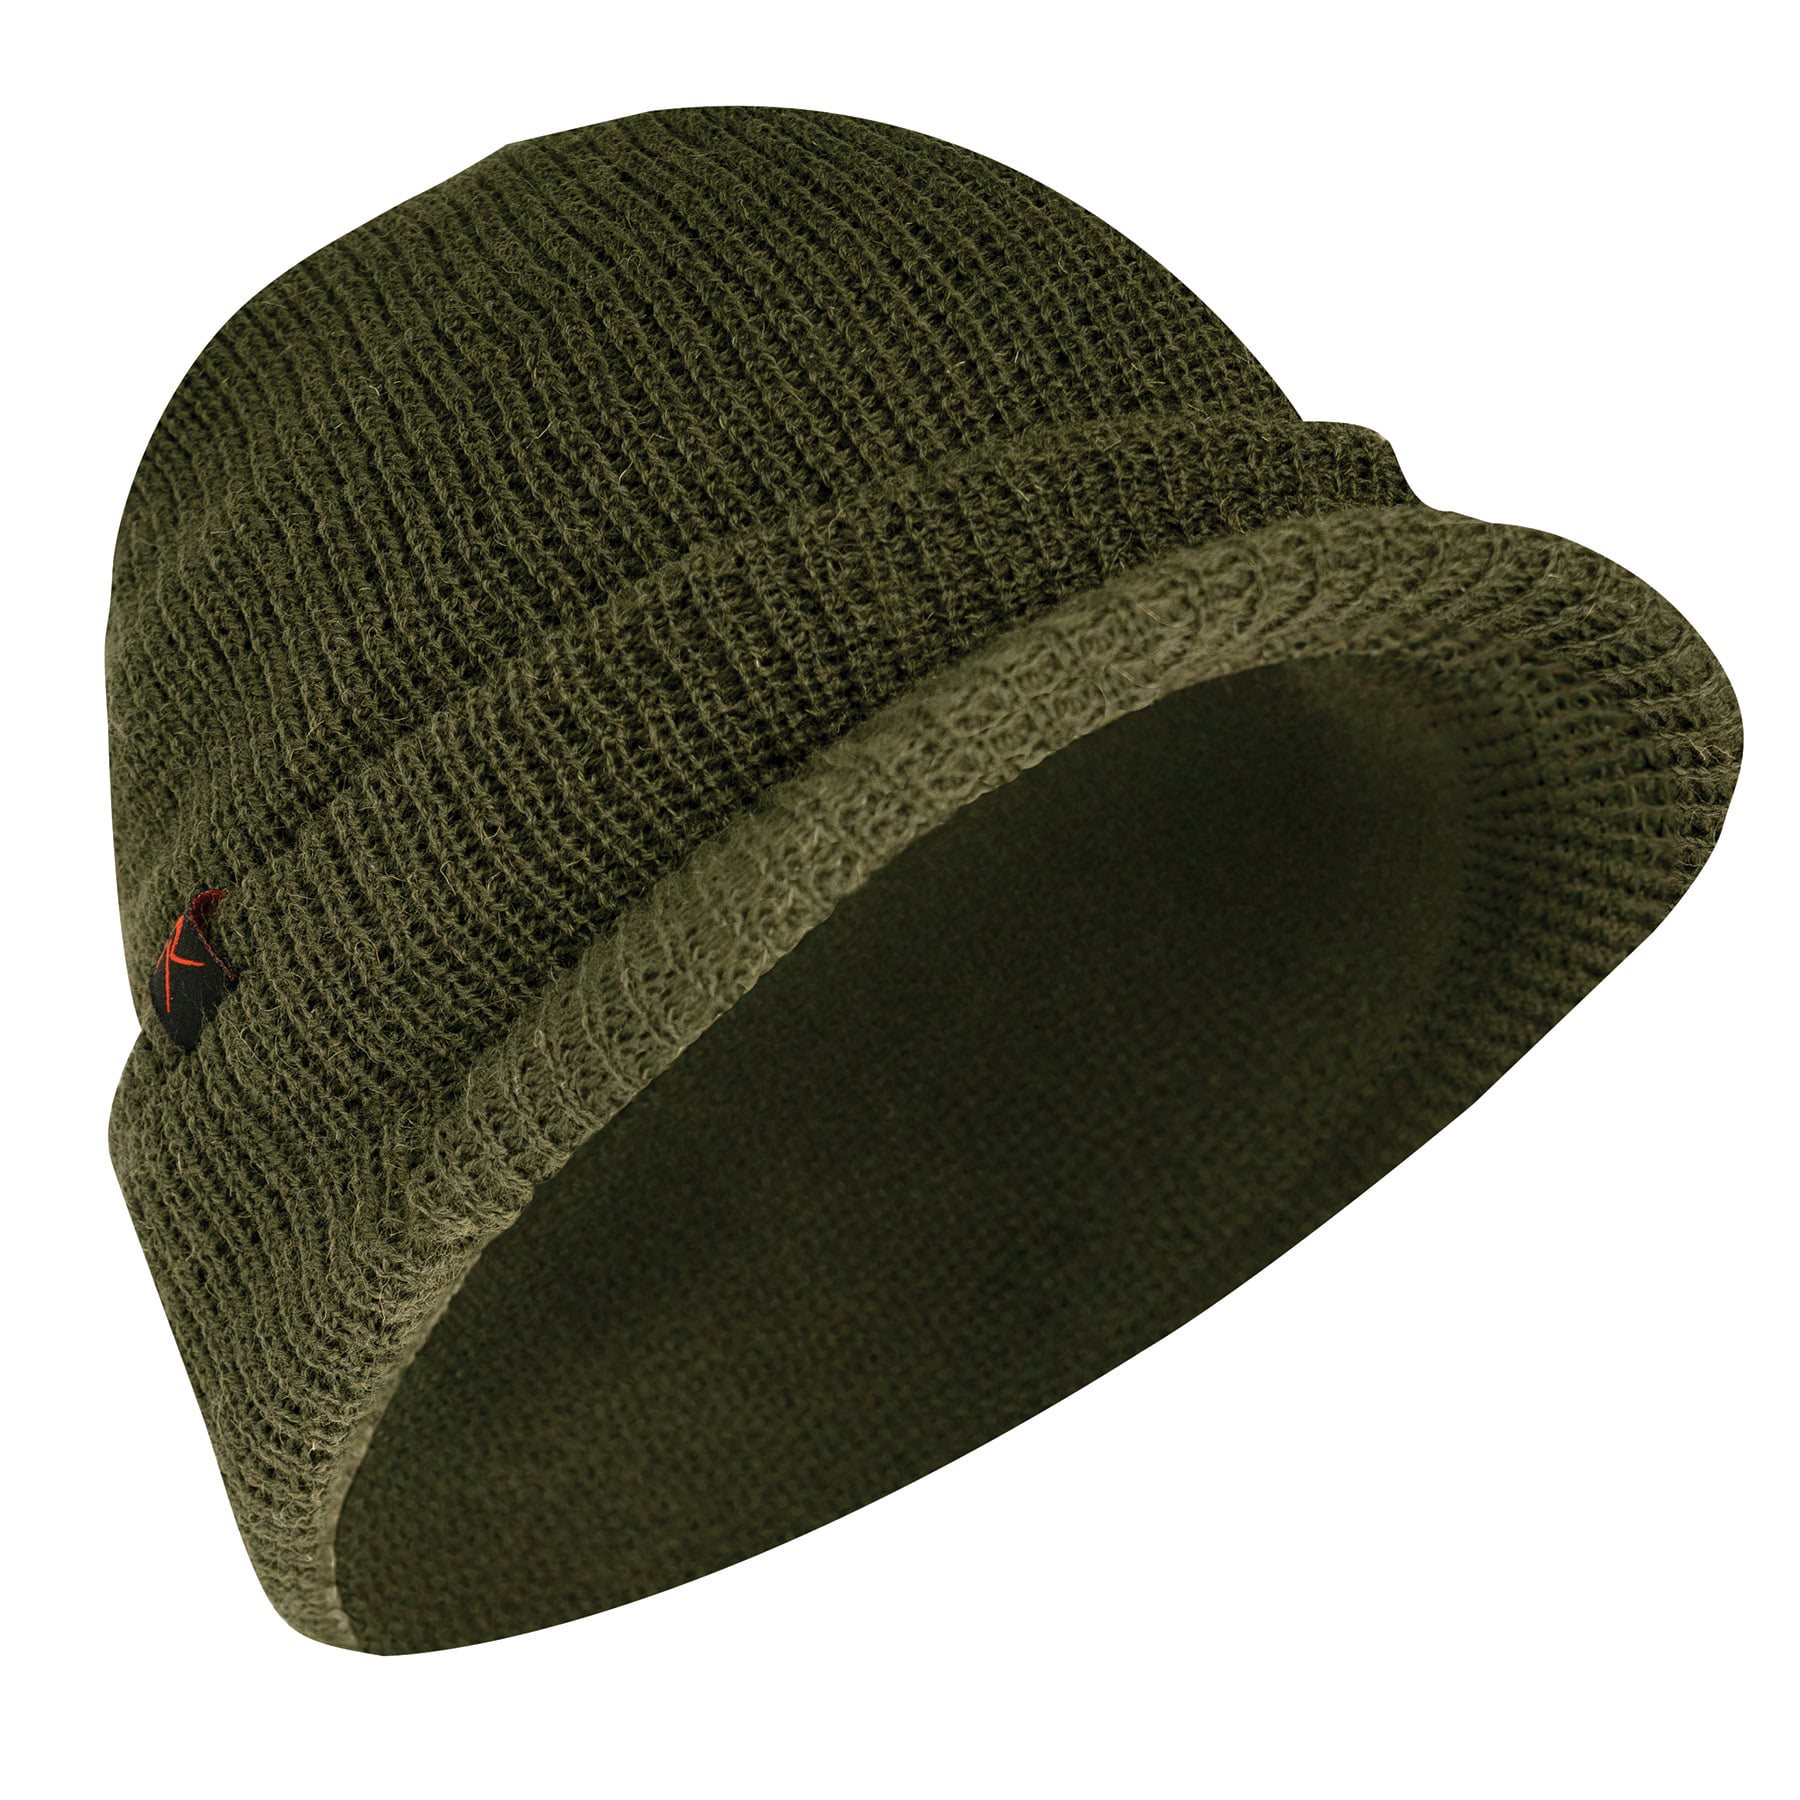 Rothco 5428 Rothco usmc eagle, globe and anchor / us flag deluxe fine knit  watch cap-Veetrends.com